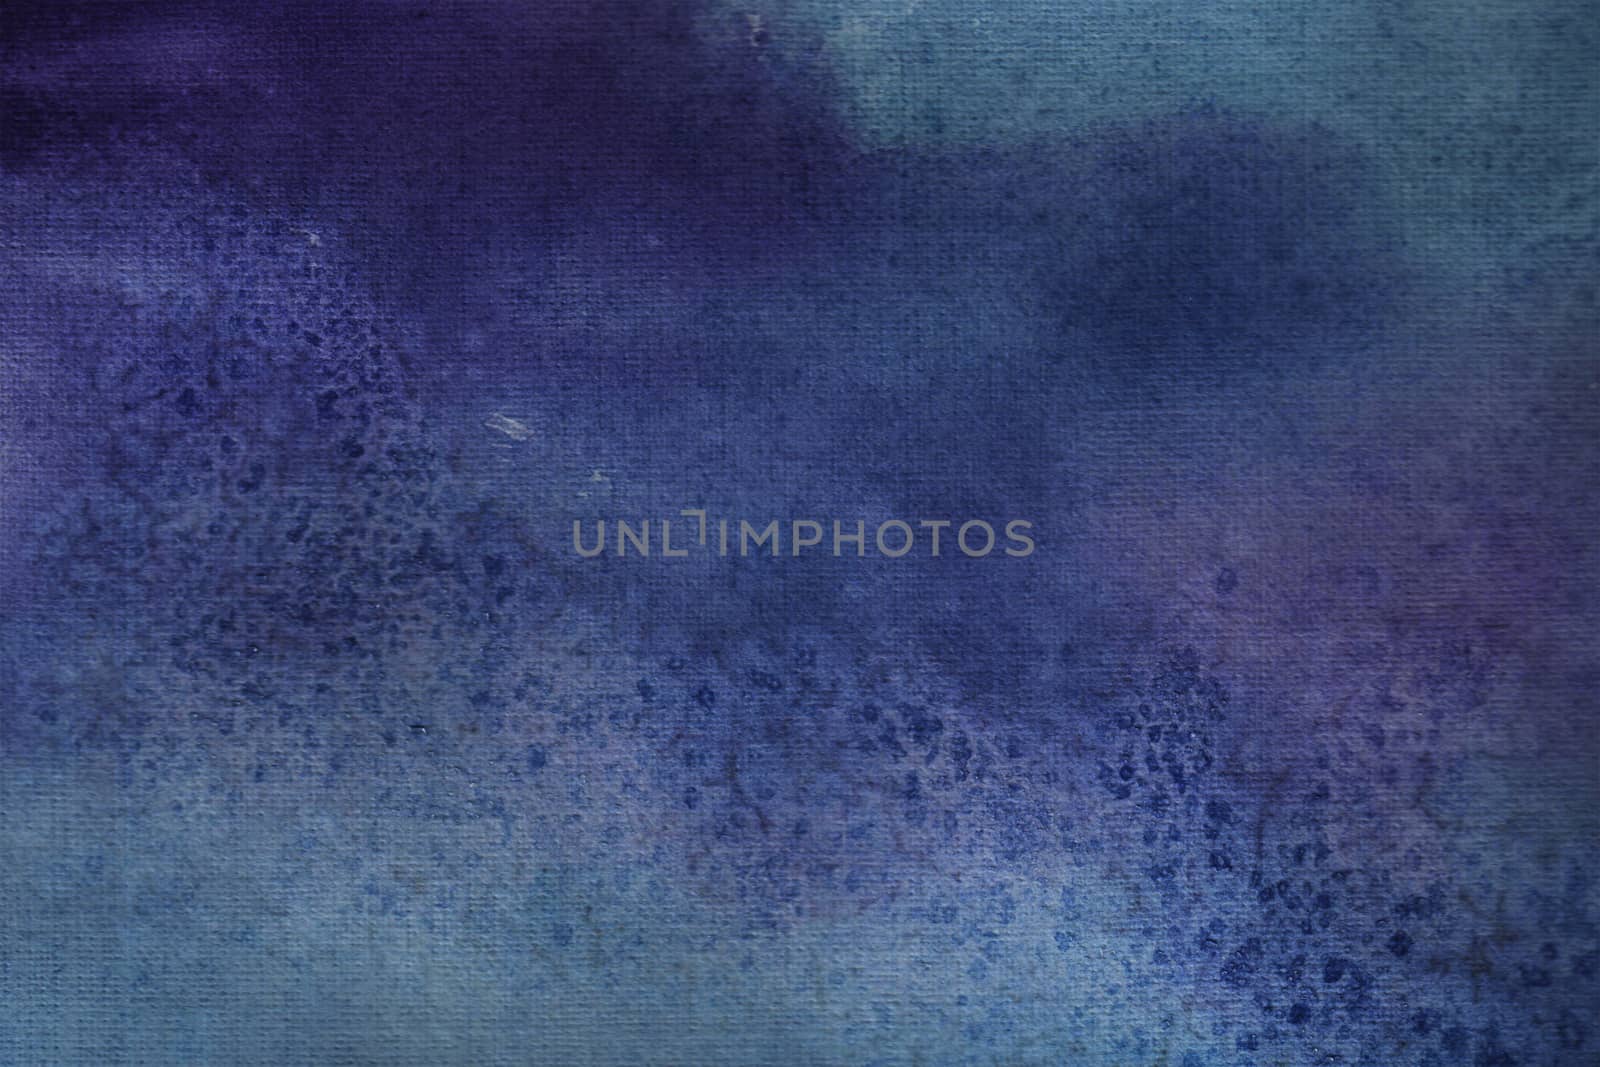 Red and blue abstract watercolor background for textures backdrops and web banners design.